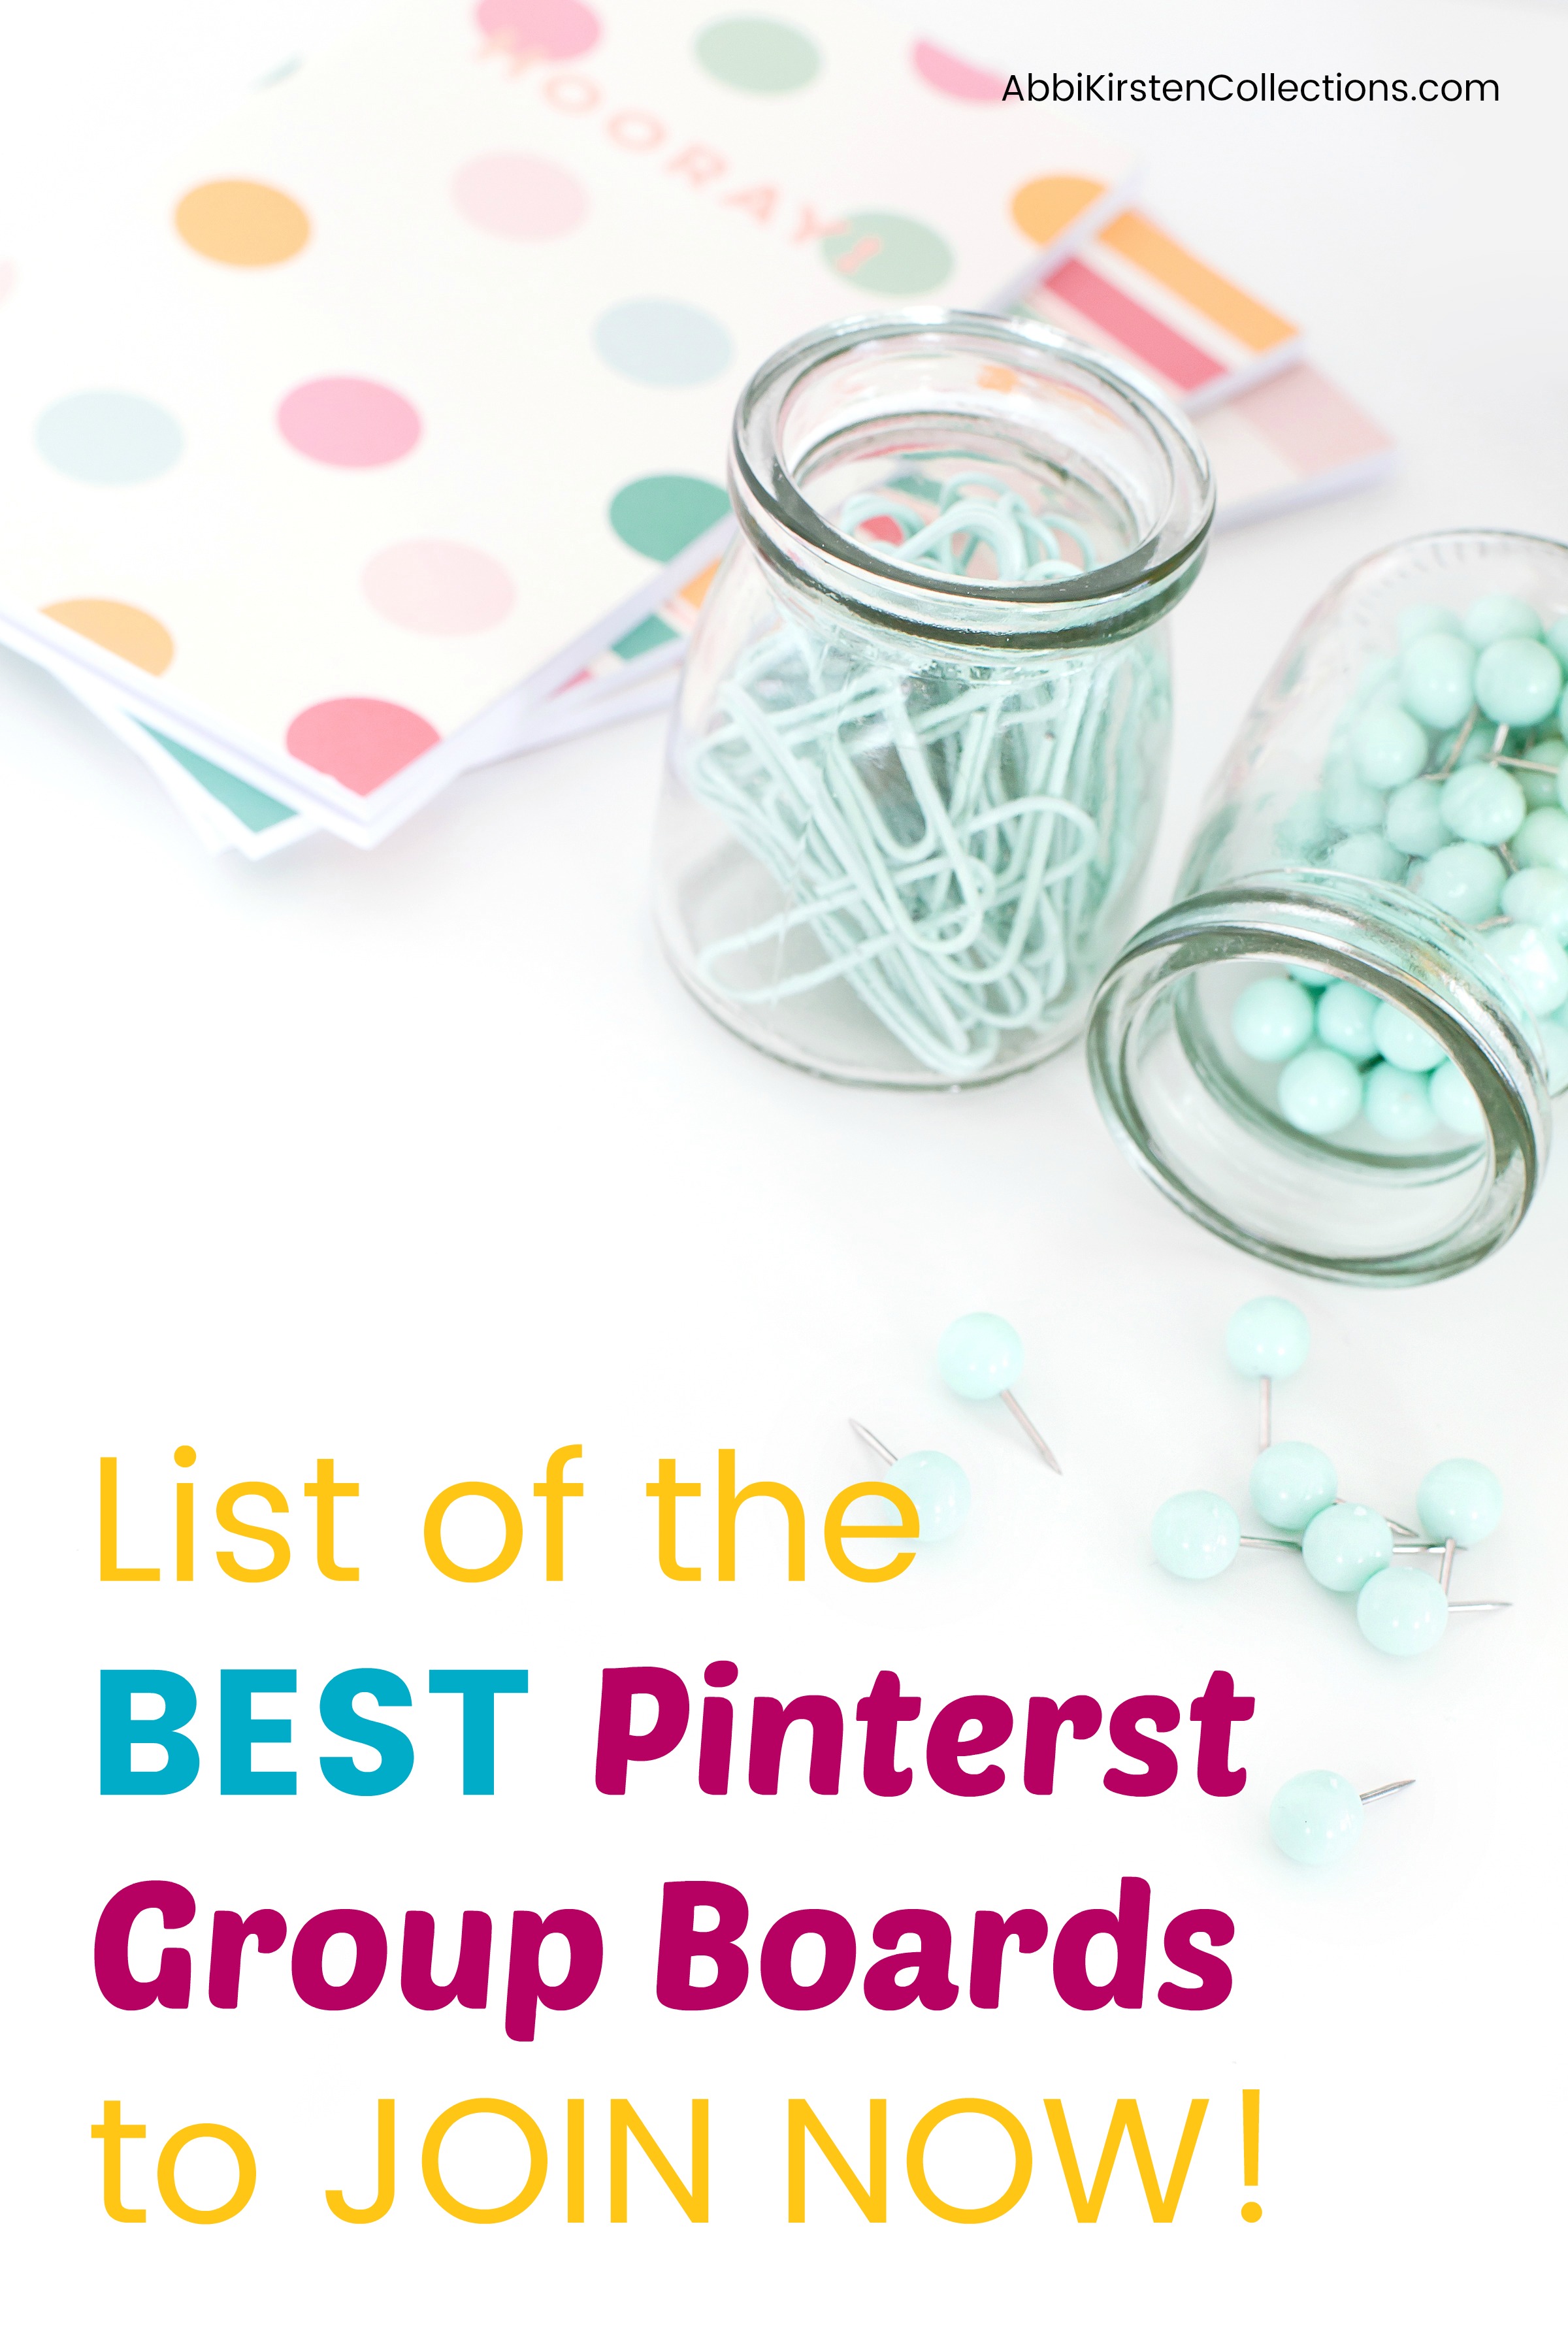 A stack of booklets in pastel colors next to two clear jars. One is filled with mint green paper clips, the other is filled with mint green tacks.  Multicolored image text overlay reads "List of the Best Pinterest Group Boards to Join Now!"